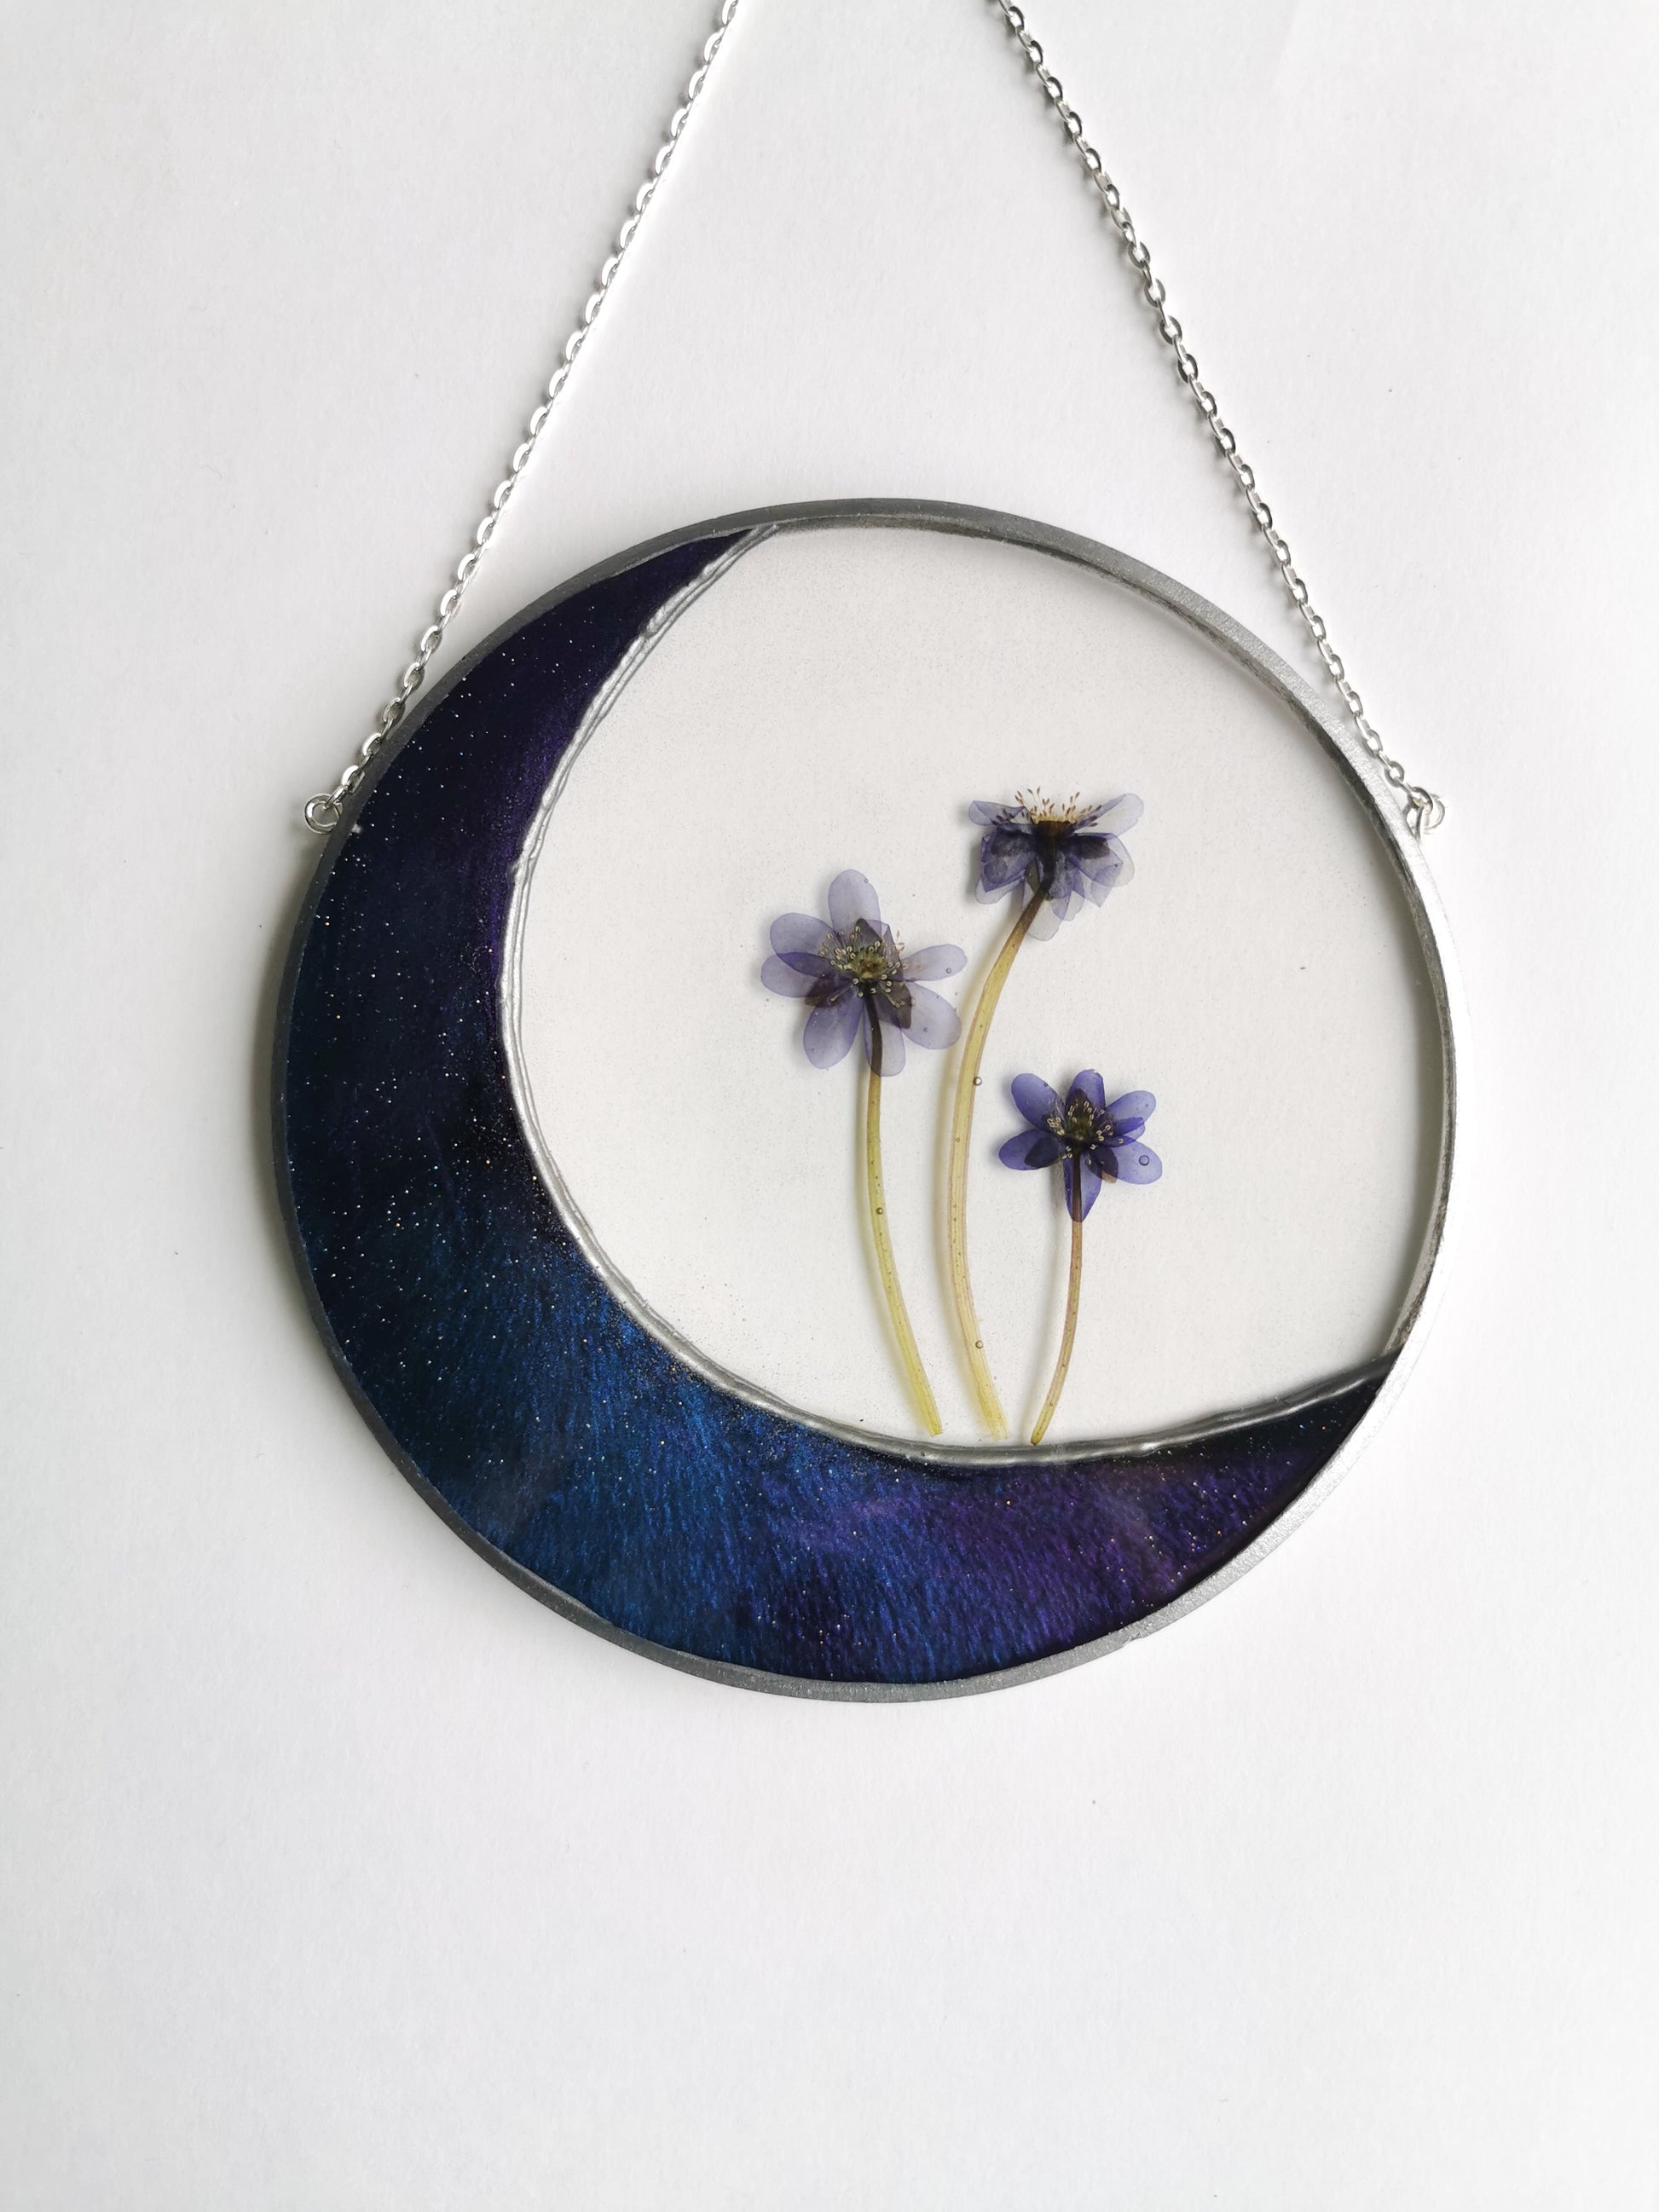 Resin moon sun catcher with real dried flowers in resin art boho